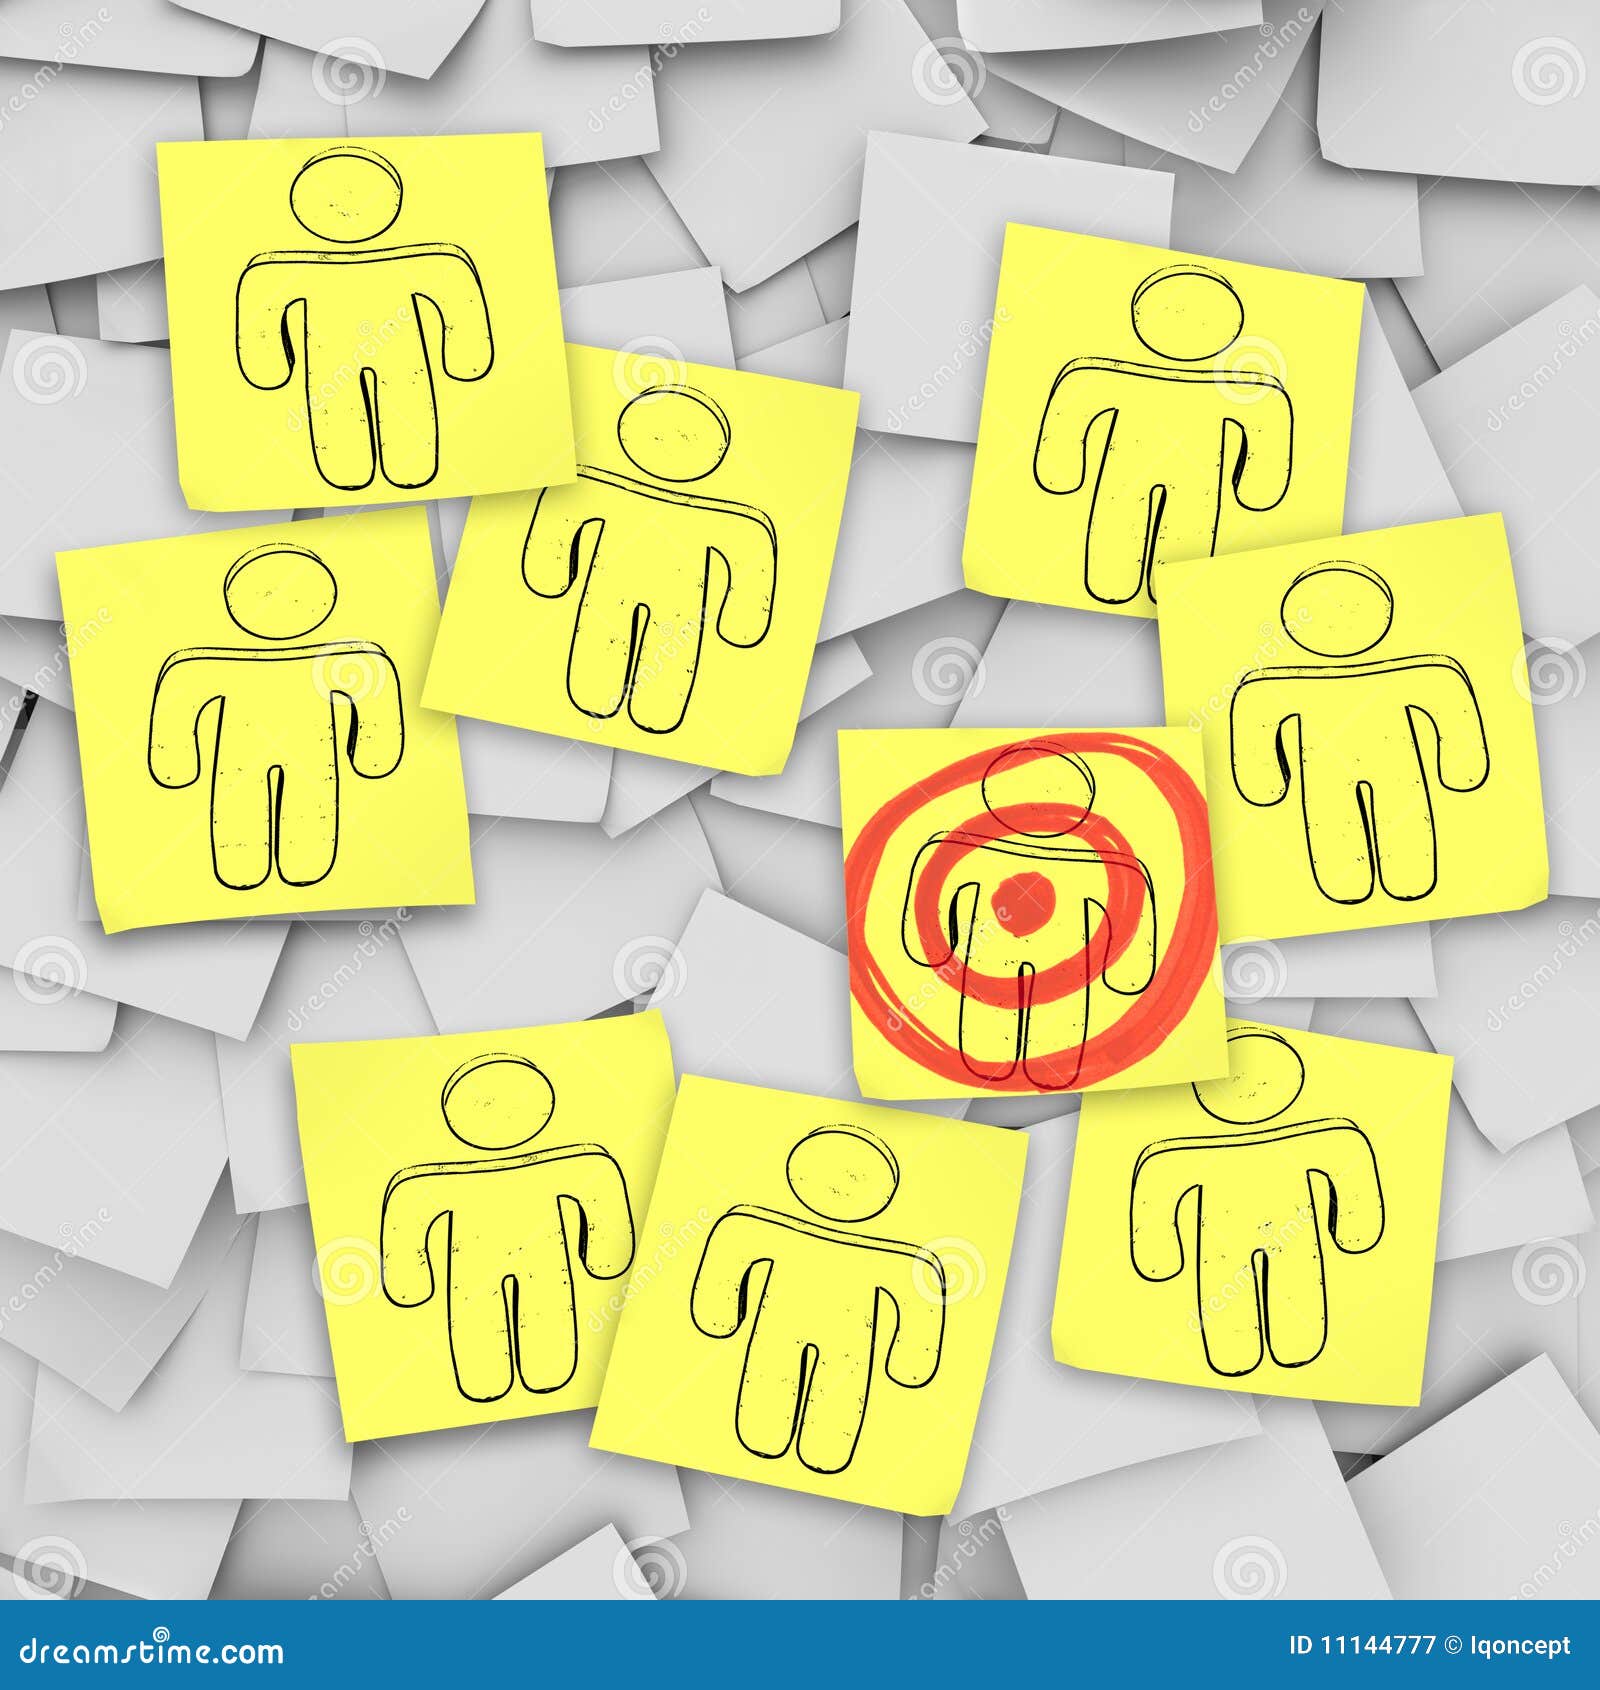 targeted customer in bulls-eye - sticky notes